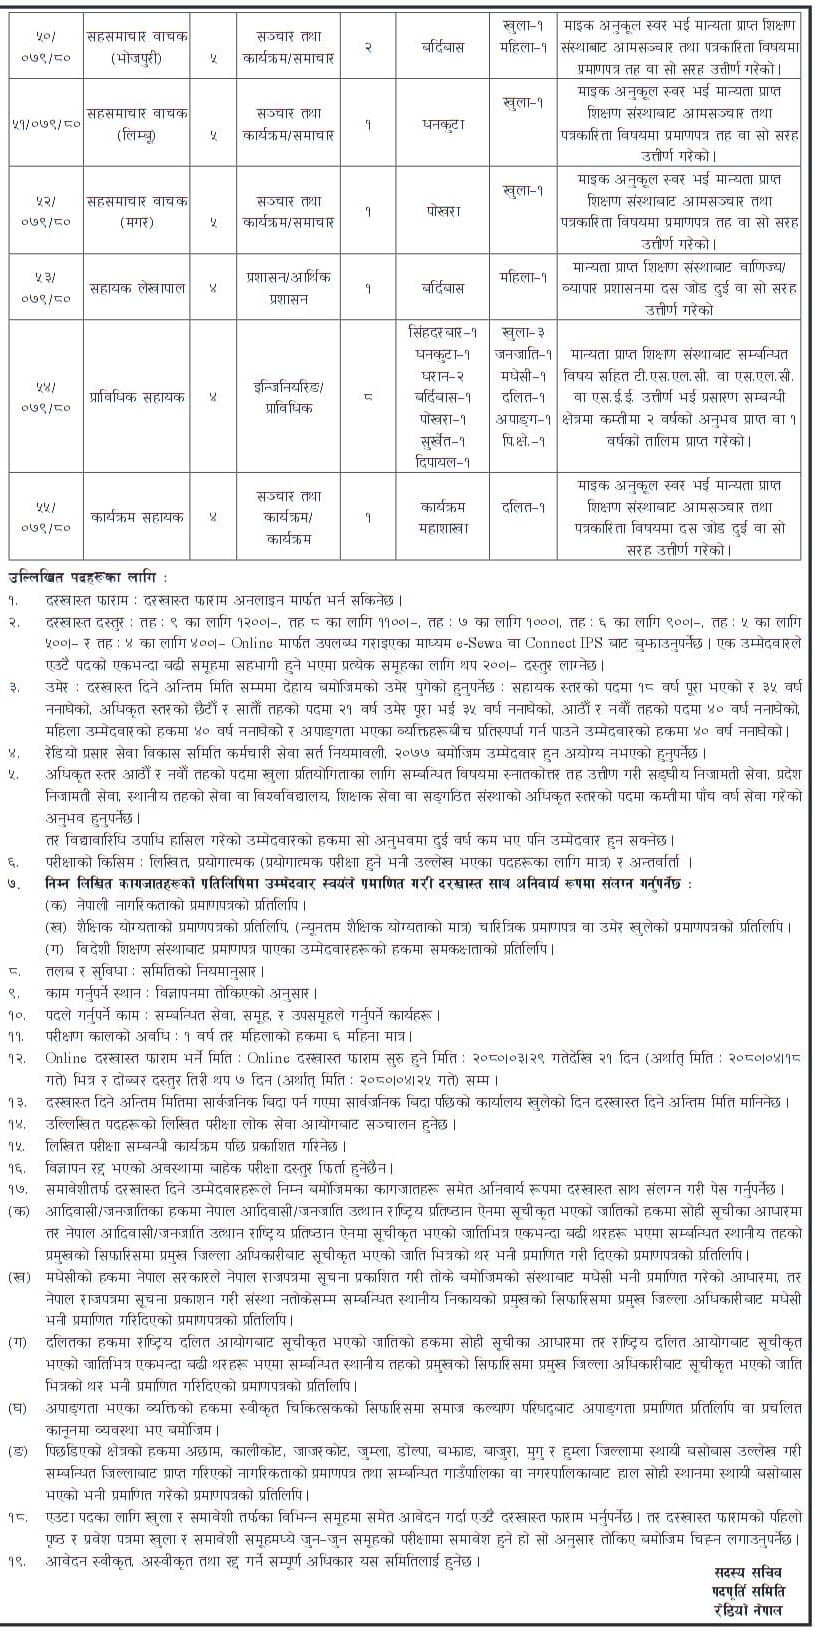 Radio Nepal Vacancy 2080 for Various Positions